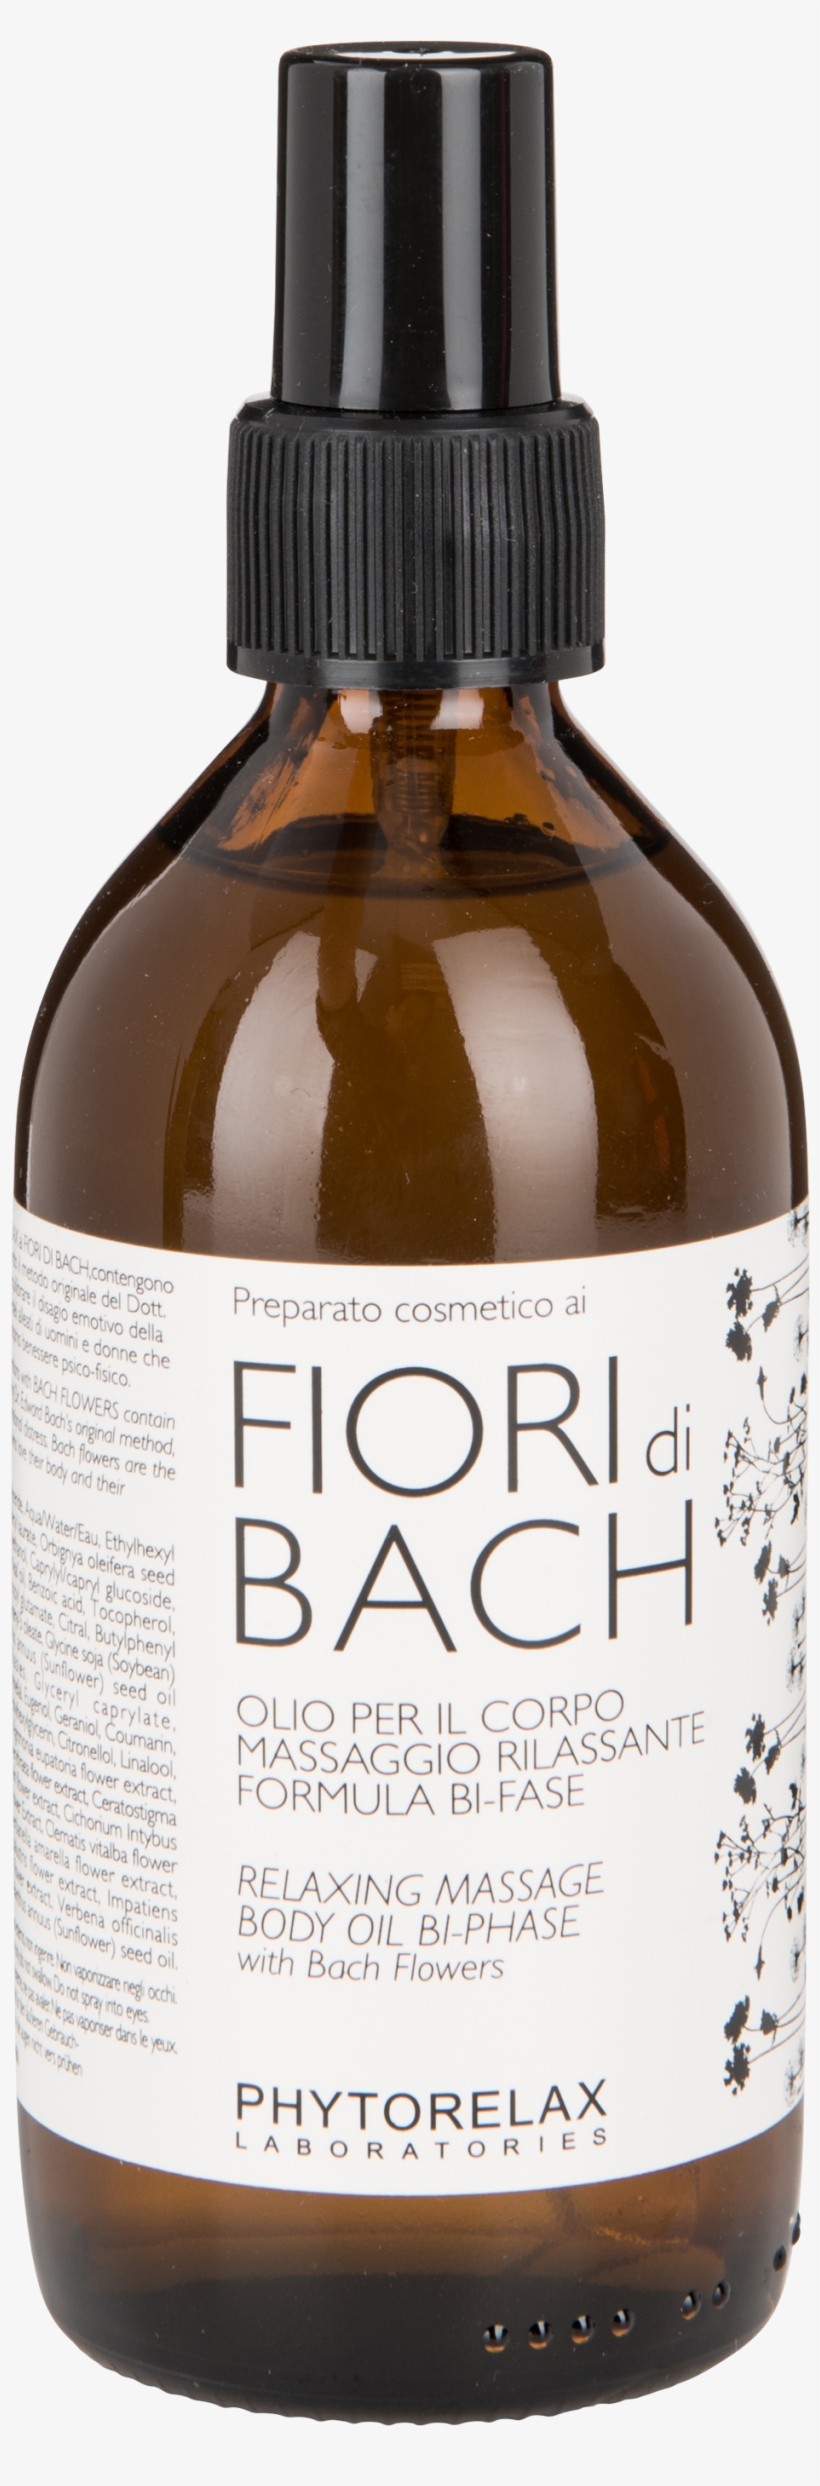 Phytorelax Bach Flowers Relaxing Massage Body Oil Bi - Peter Thomas Roth Professional 3% Retinoid Plus, transparent png #4614501